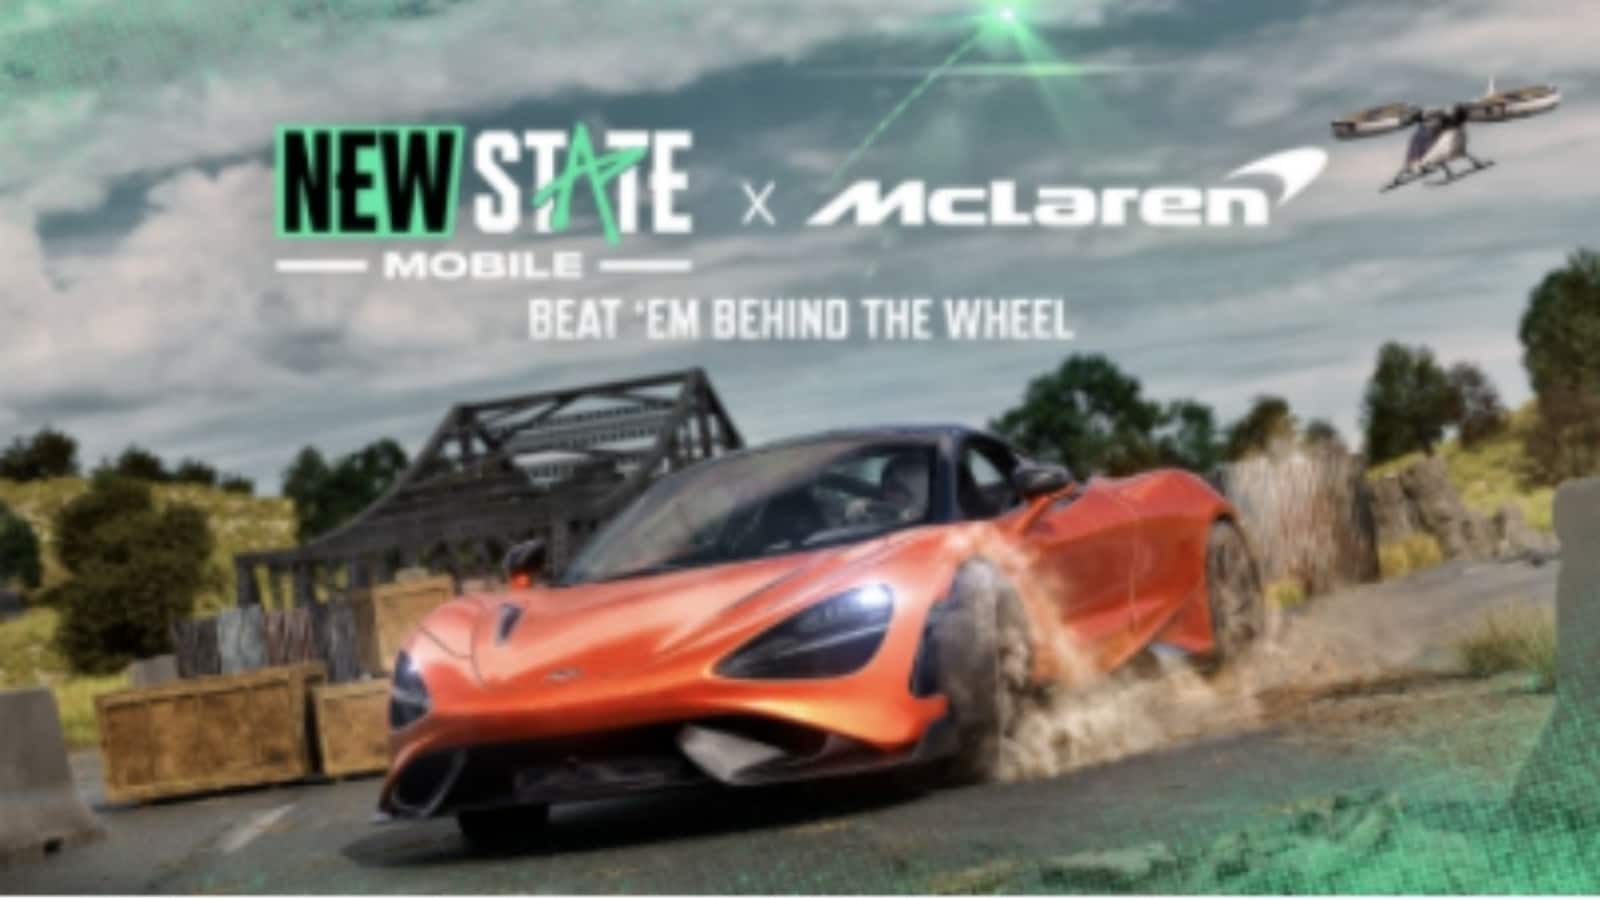 New State Mobile x McLaren Event is on! Know date, rewards, other details